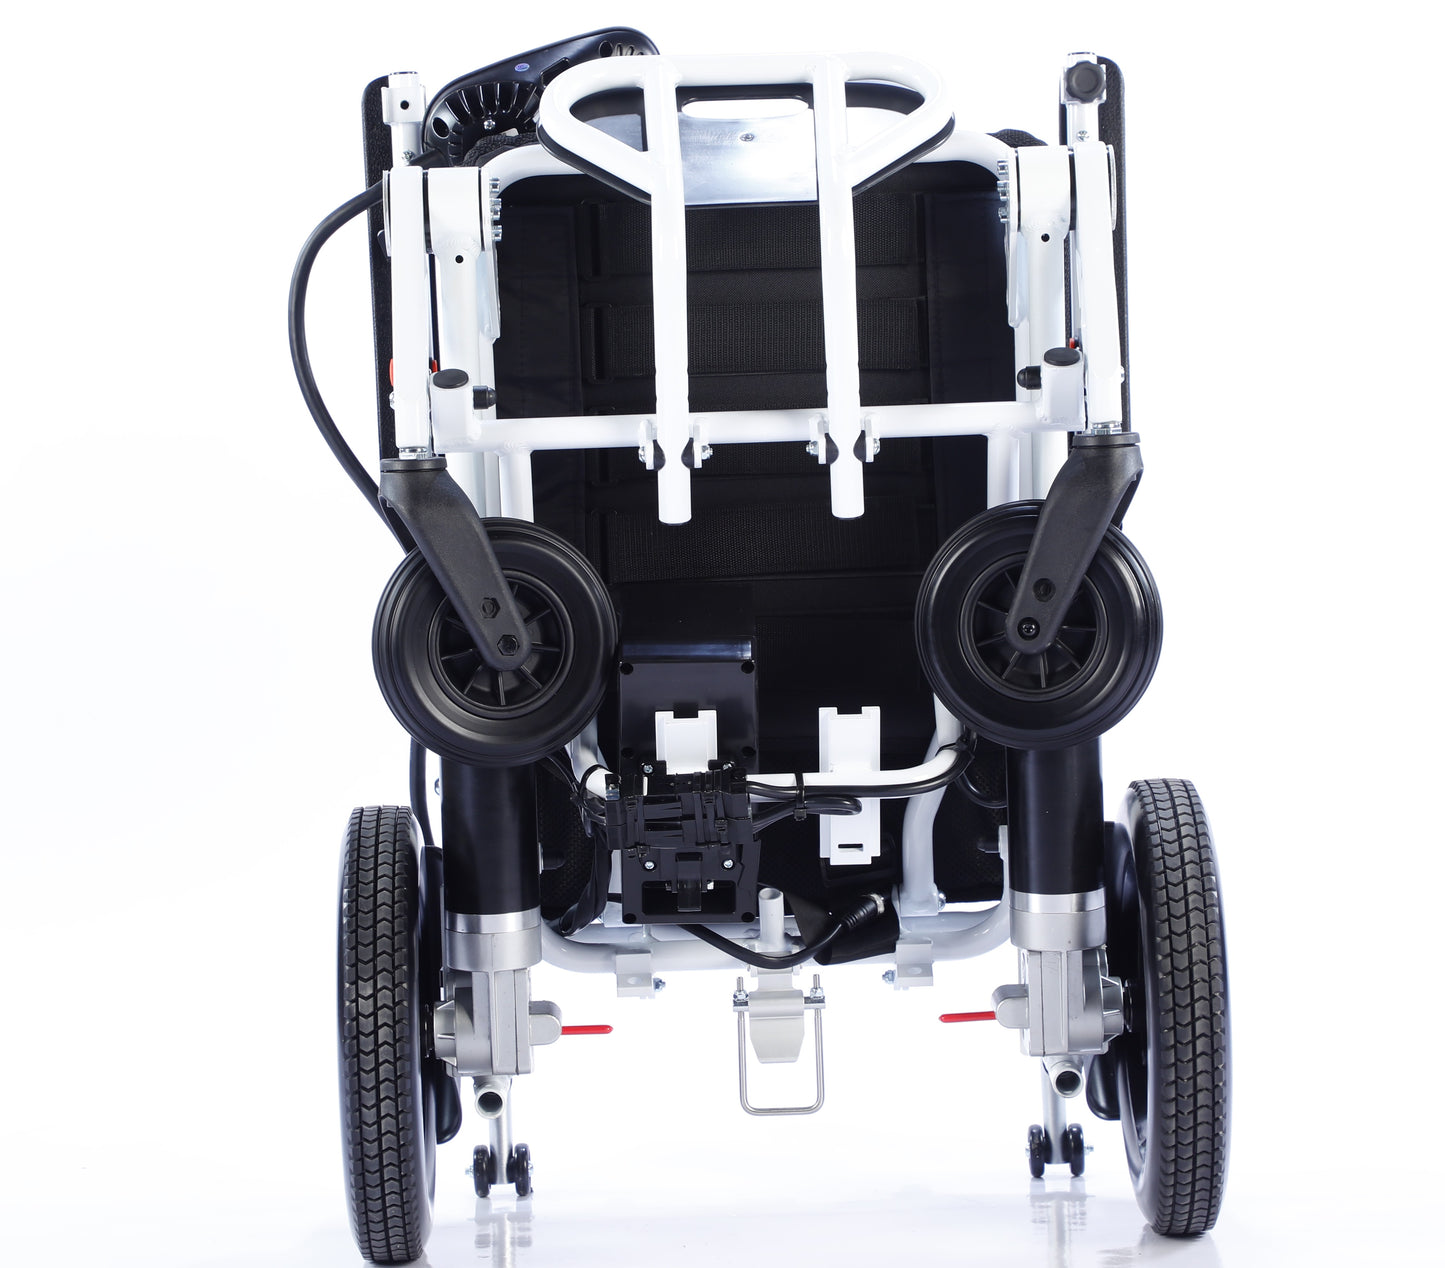 Dr.Ortho electric wheelchair DR-N-20-E light weight aluminum frame with lithium battery motor 350W